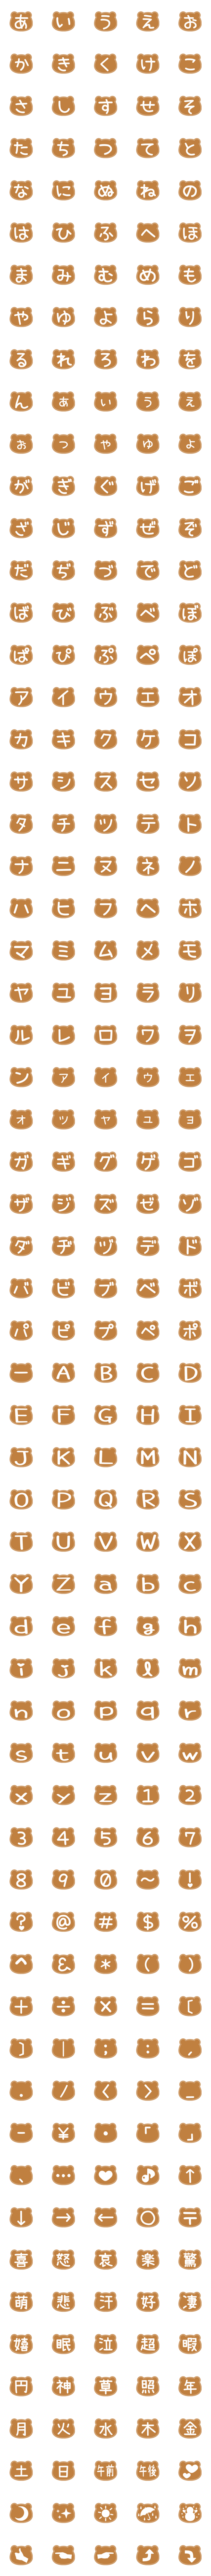 [LINE絵文字]クマ枠絵文字(キャラメル)の画像一覧